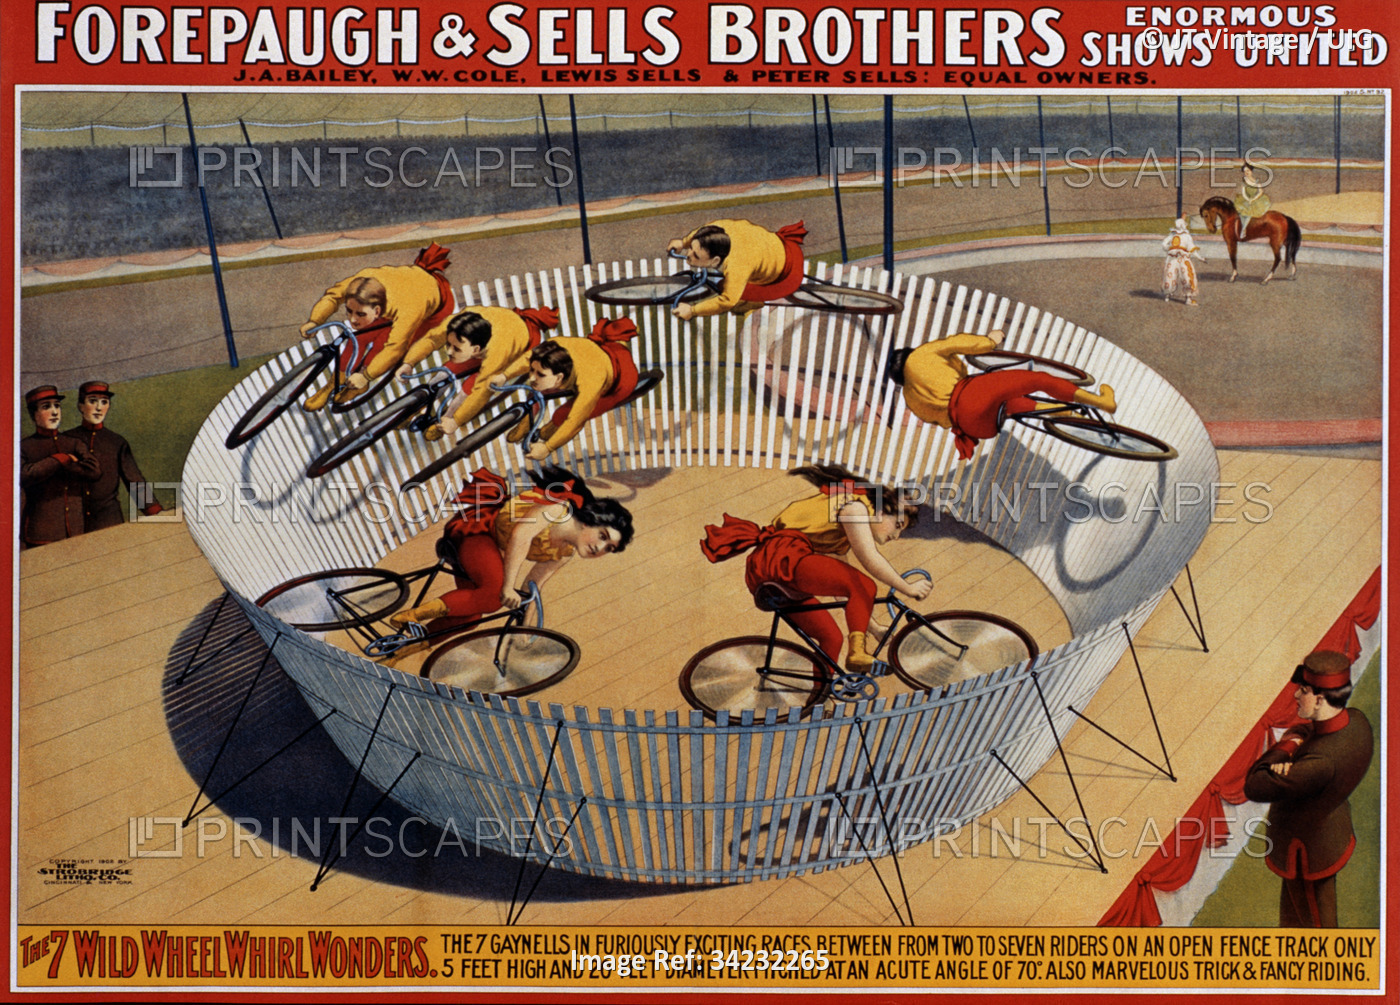 Forepaugh and Sells Brothers Poster, The 7 Wild Wheel Whirl Wonders. (Photo by: ...